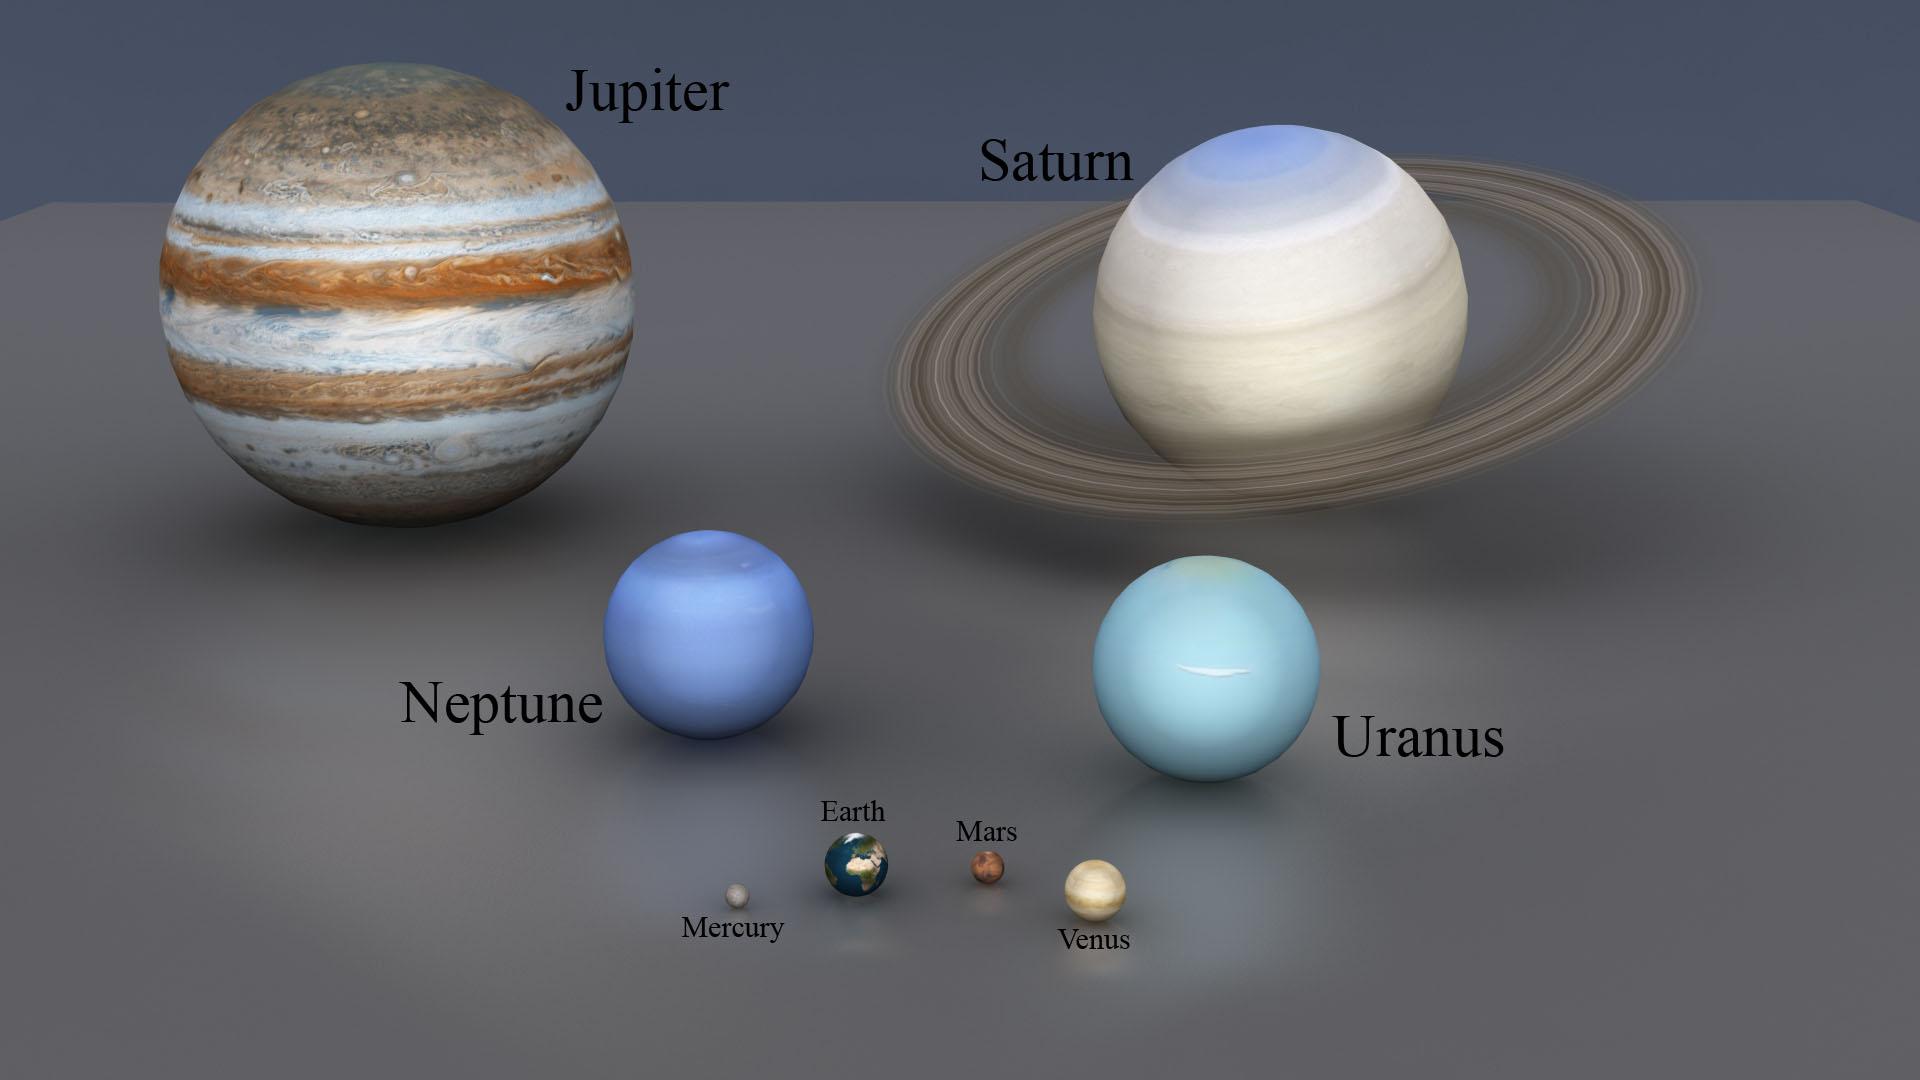 Macy Aguirre- The Outer Planets macy aguirre [Infographic]